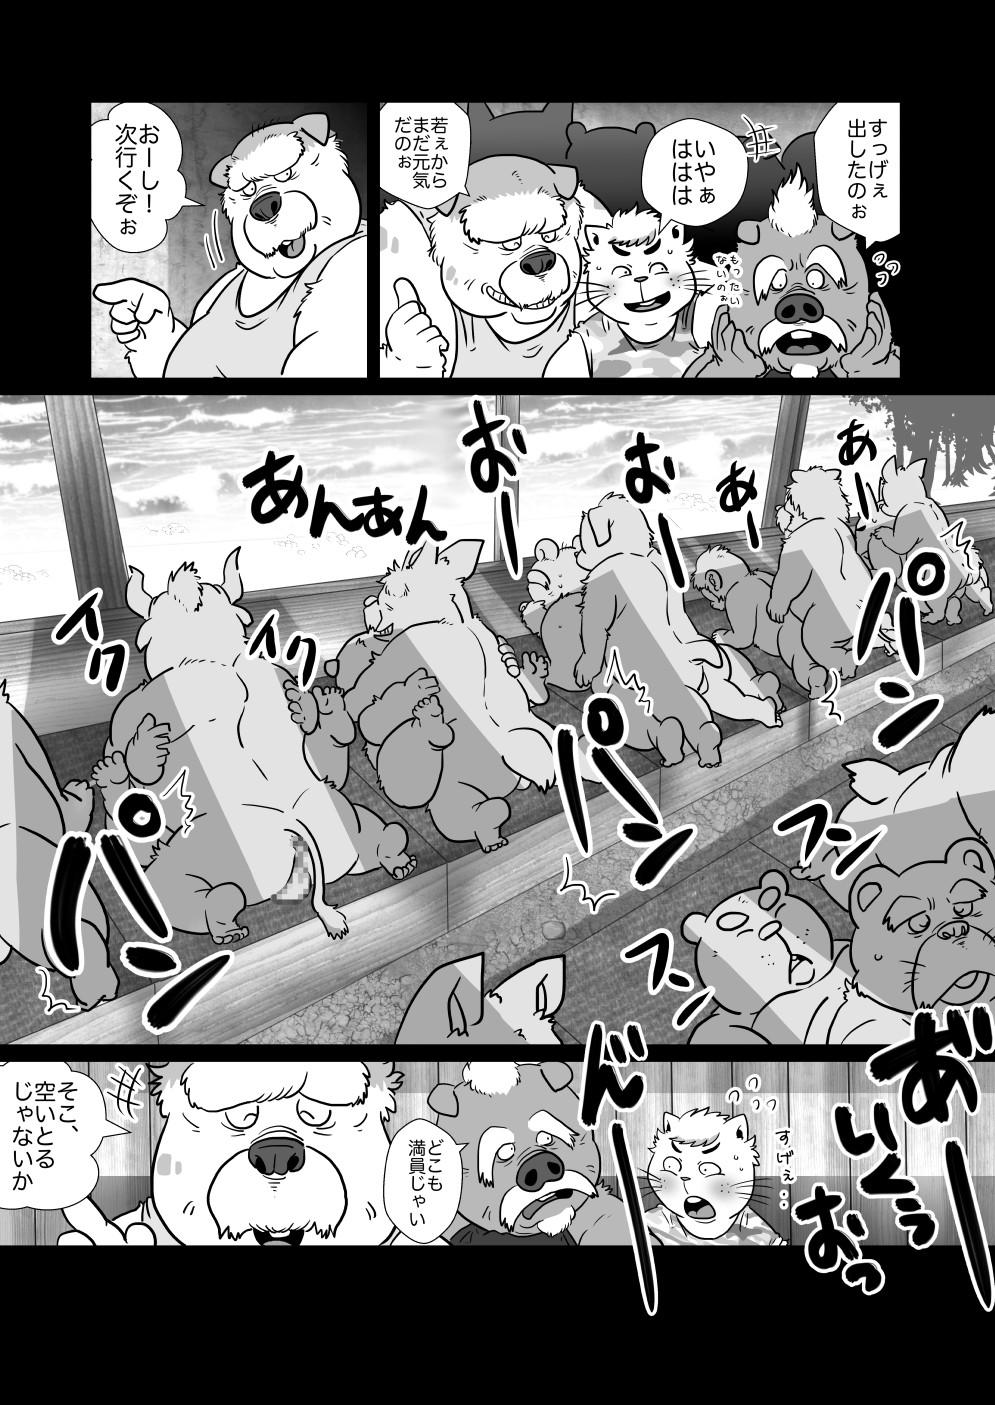 Mom 【ハッテンビーチ】ふぃすとふぁっく【ケモホモ注意】 Parties - Page 10